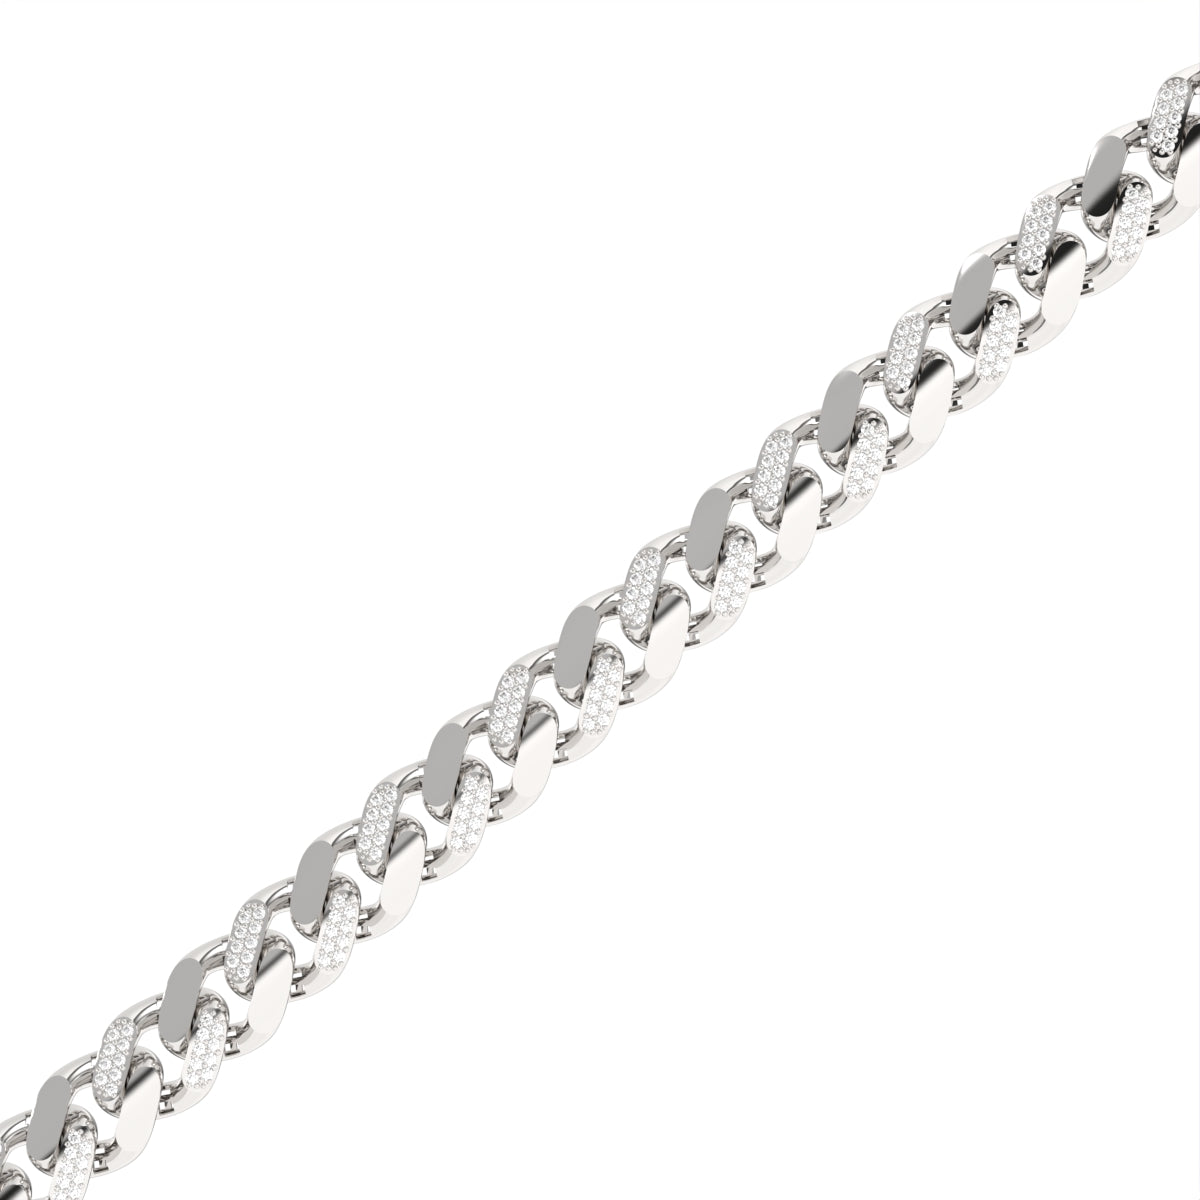 Micro Pave Diamond Plate Miami Cuban Links Iced Out Bracelet 7 Inches  68136: buy online in NYC. Best price at TRAXNYC.